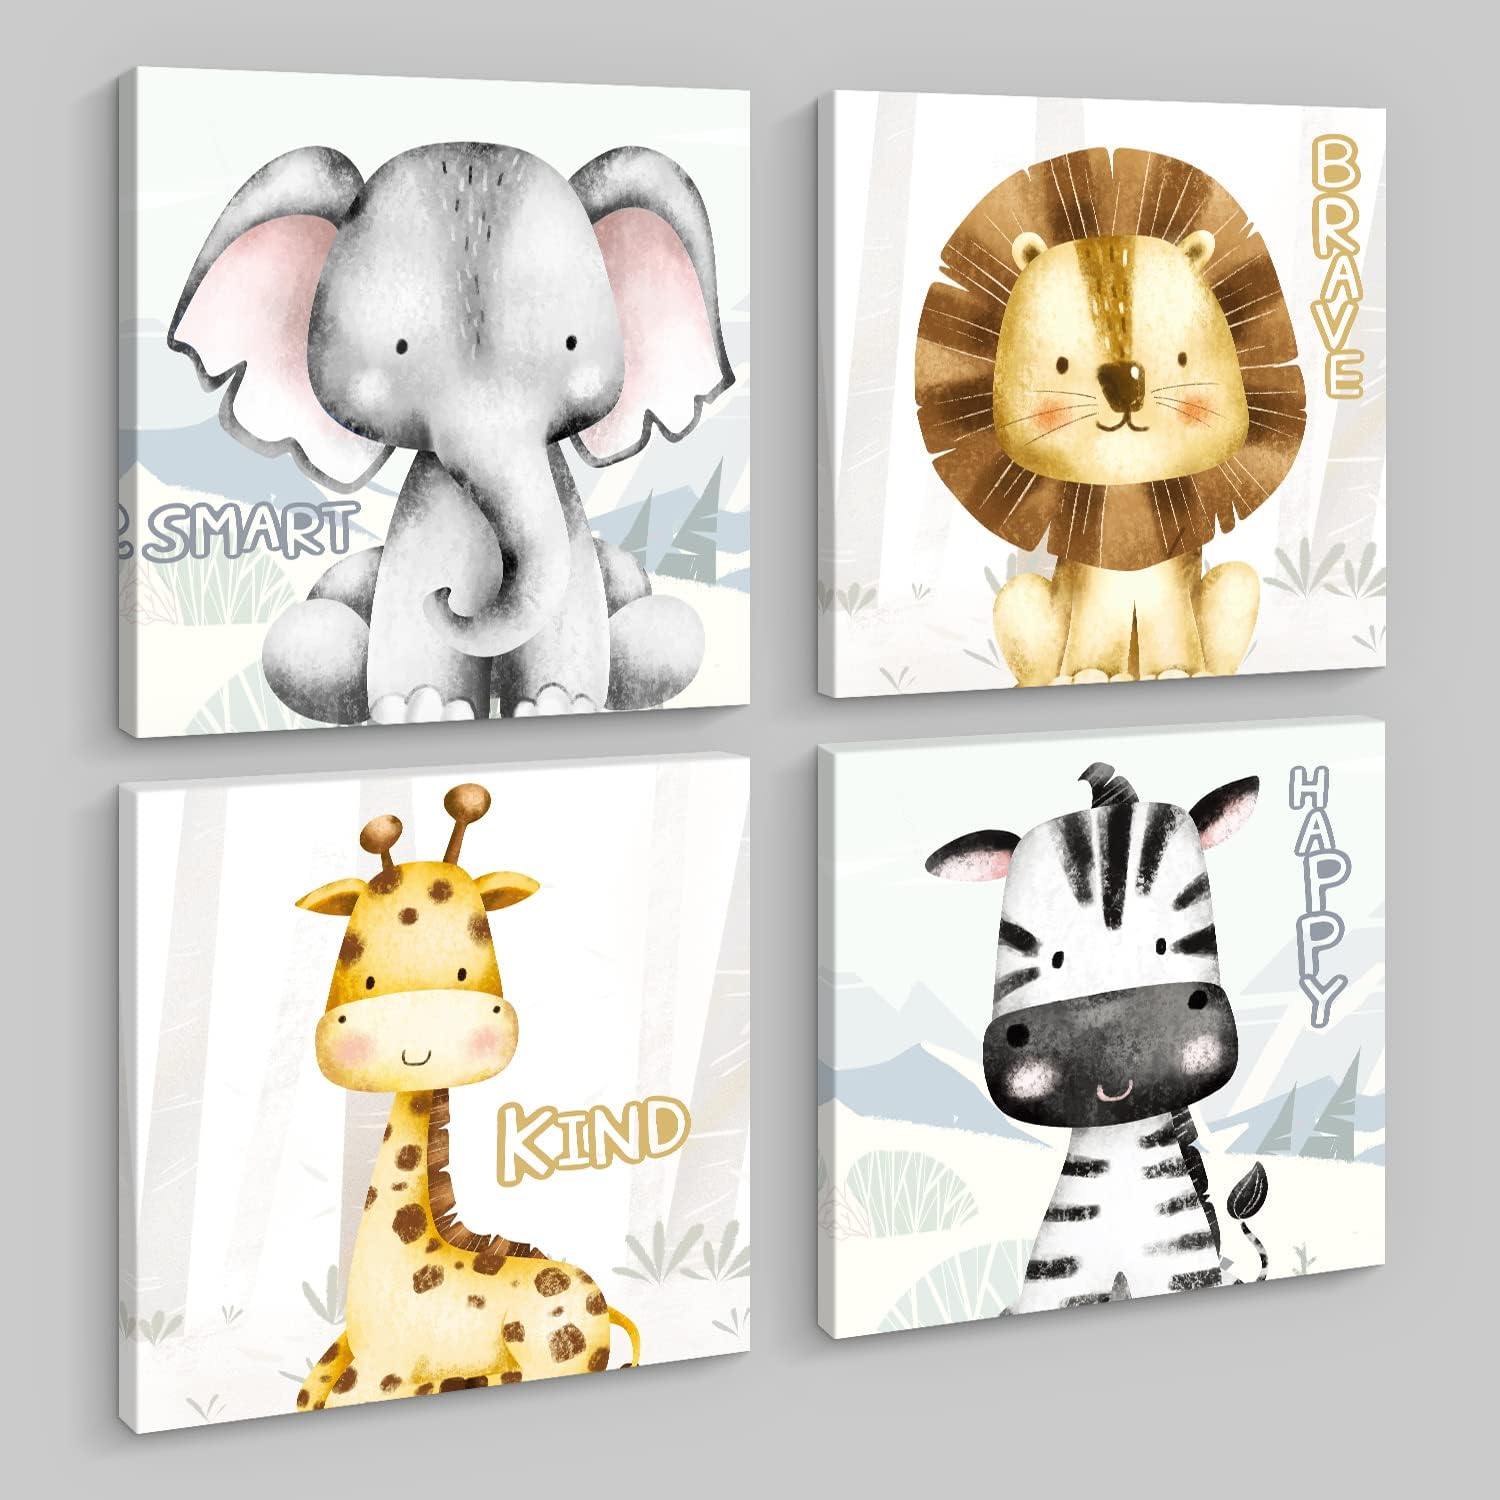 Creoate Kids Room Decor Wall Art, 4 Pieces Cute Animal Picture with Inspirational Quotes Canvas Print Artwork Framed Set Adorable Nursery Wall Art for Kid Baby Child Room (12x12 Inch x4pcs)